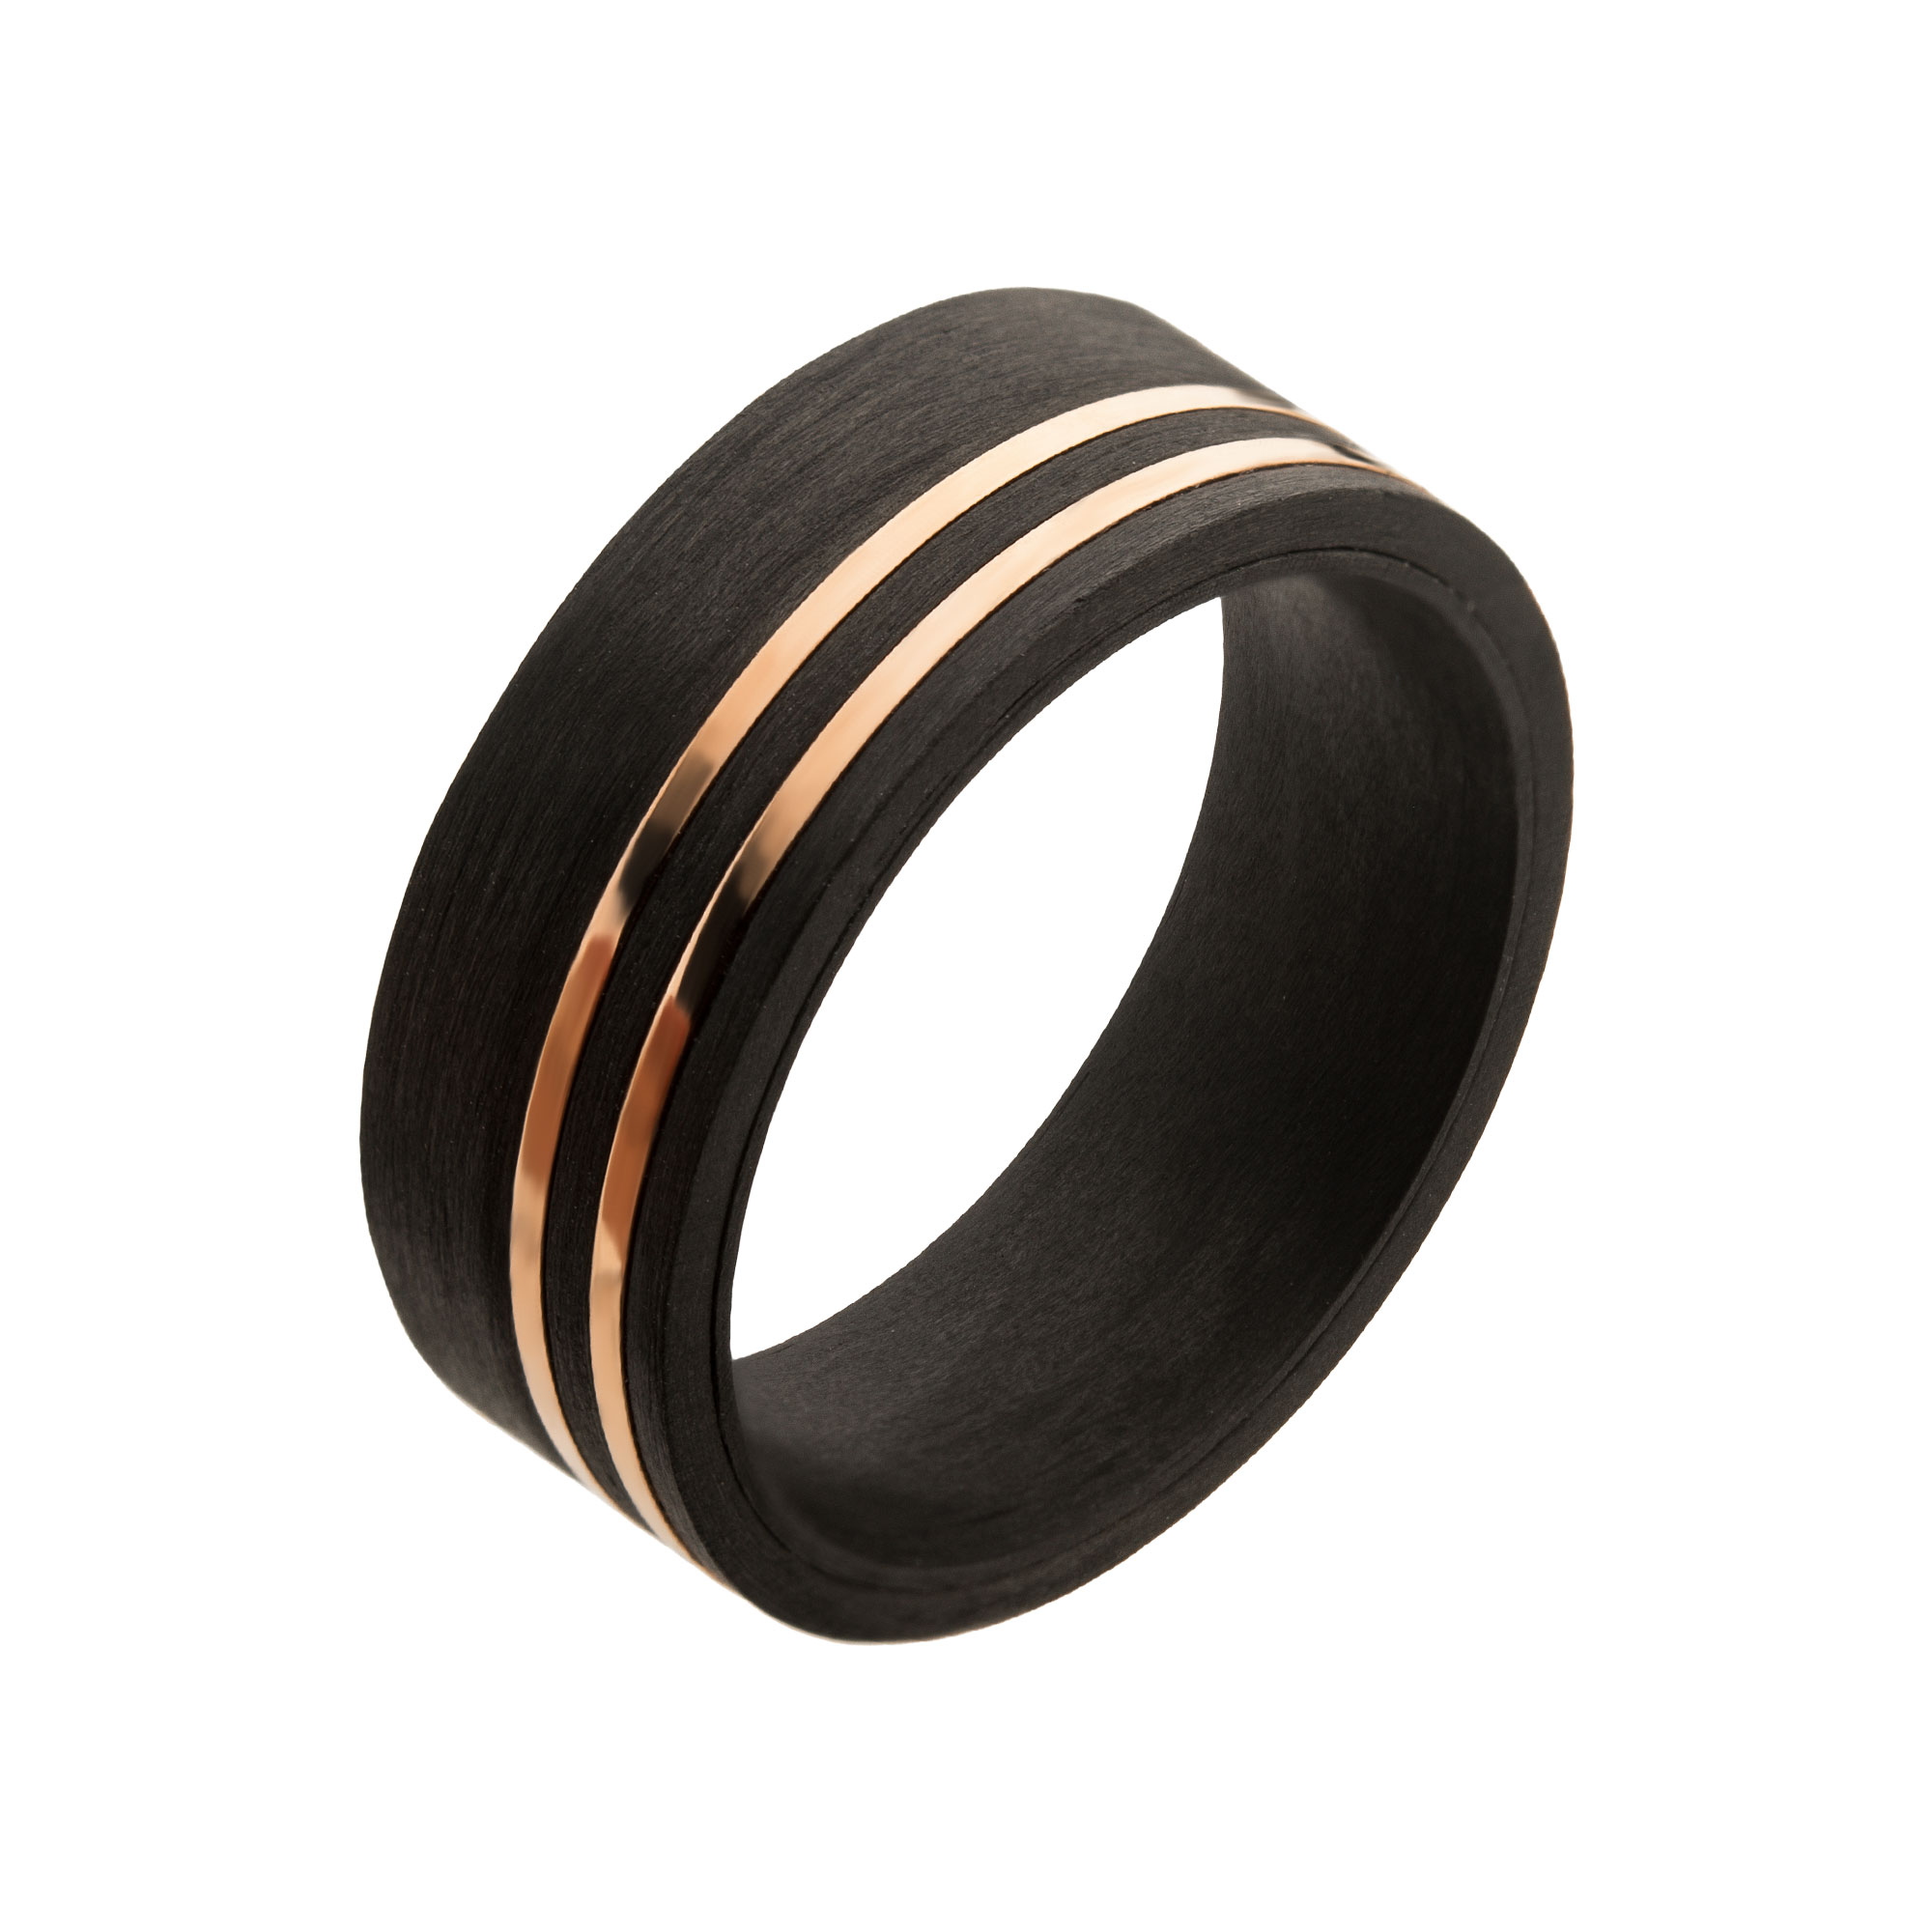 Solid Carbon with Inlayed Rose Gold Thin Lines Comfort Fit Ring Morin Jewelers Southbridge, MA